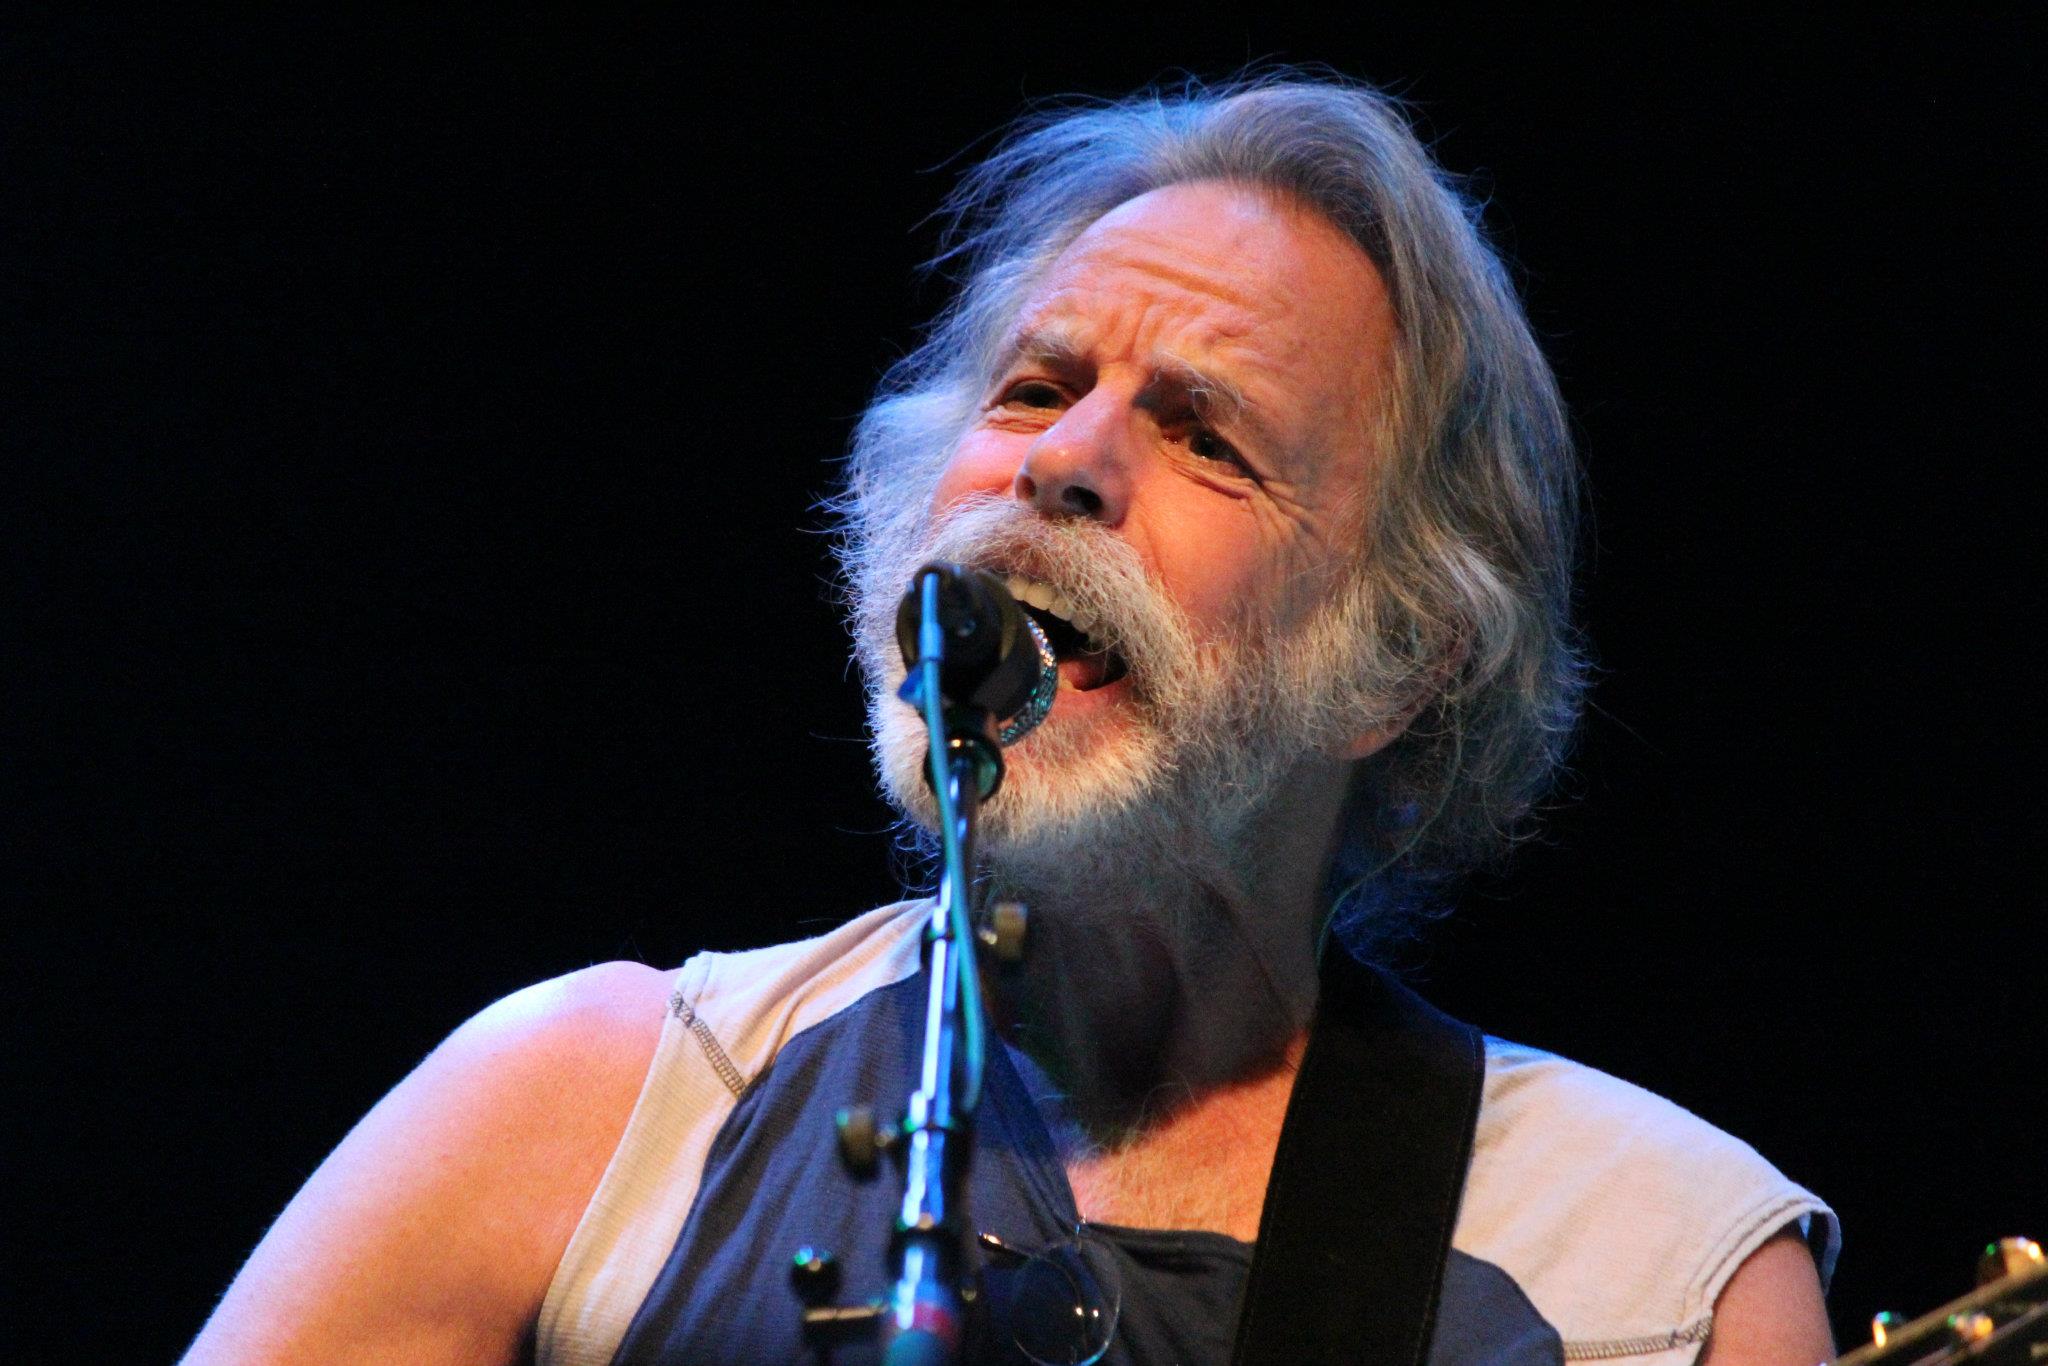 HeadCount Launches Artist Sweeps with Bobby Weir, Billy Strings + more Supporting the 'Save The Vote!' initiative to Protect Voting Rights